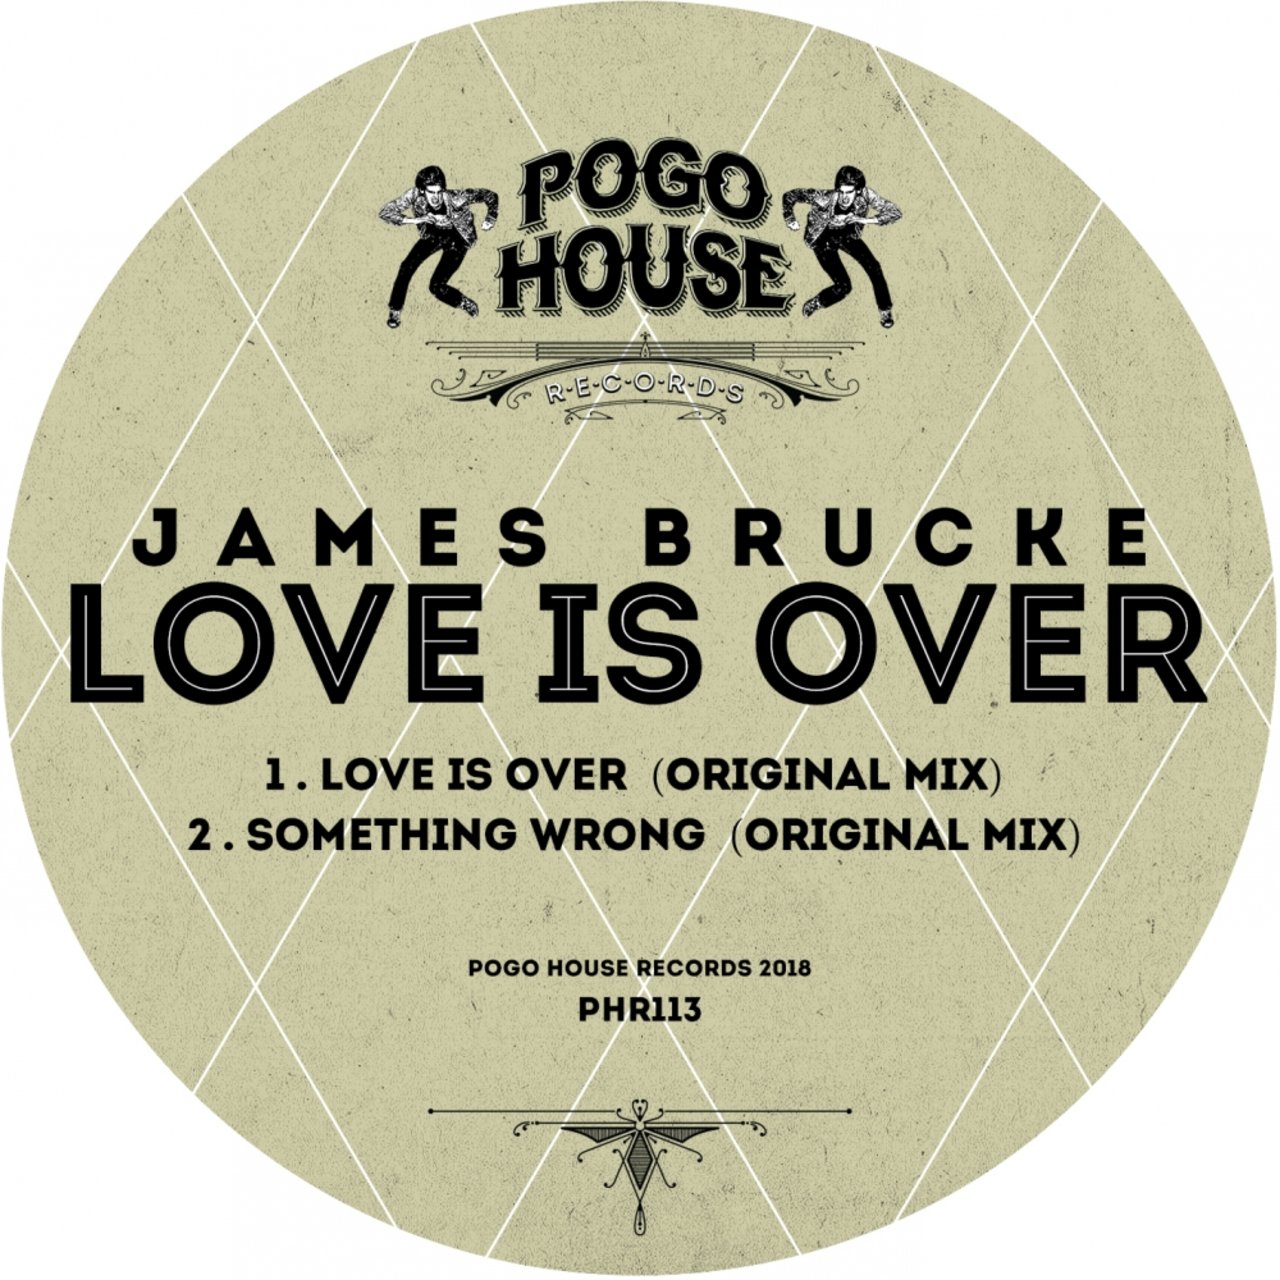 James Brucke - Love Is Over / Pogo House Records